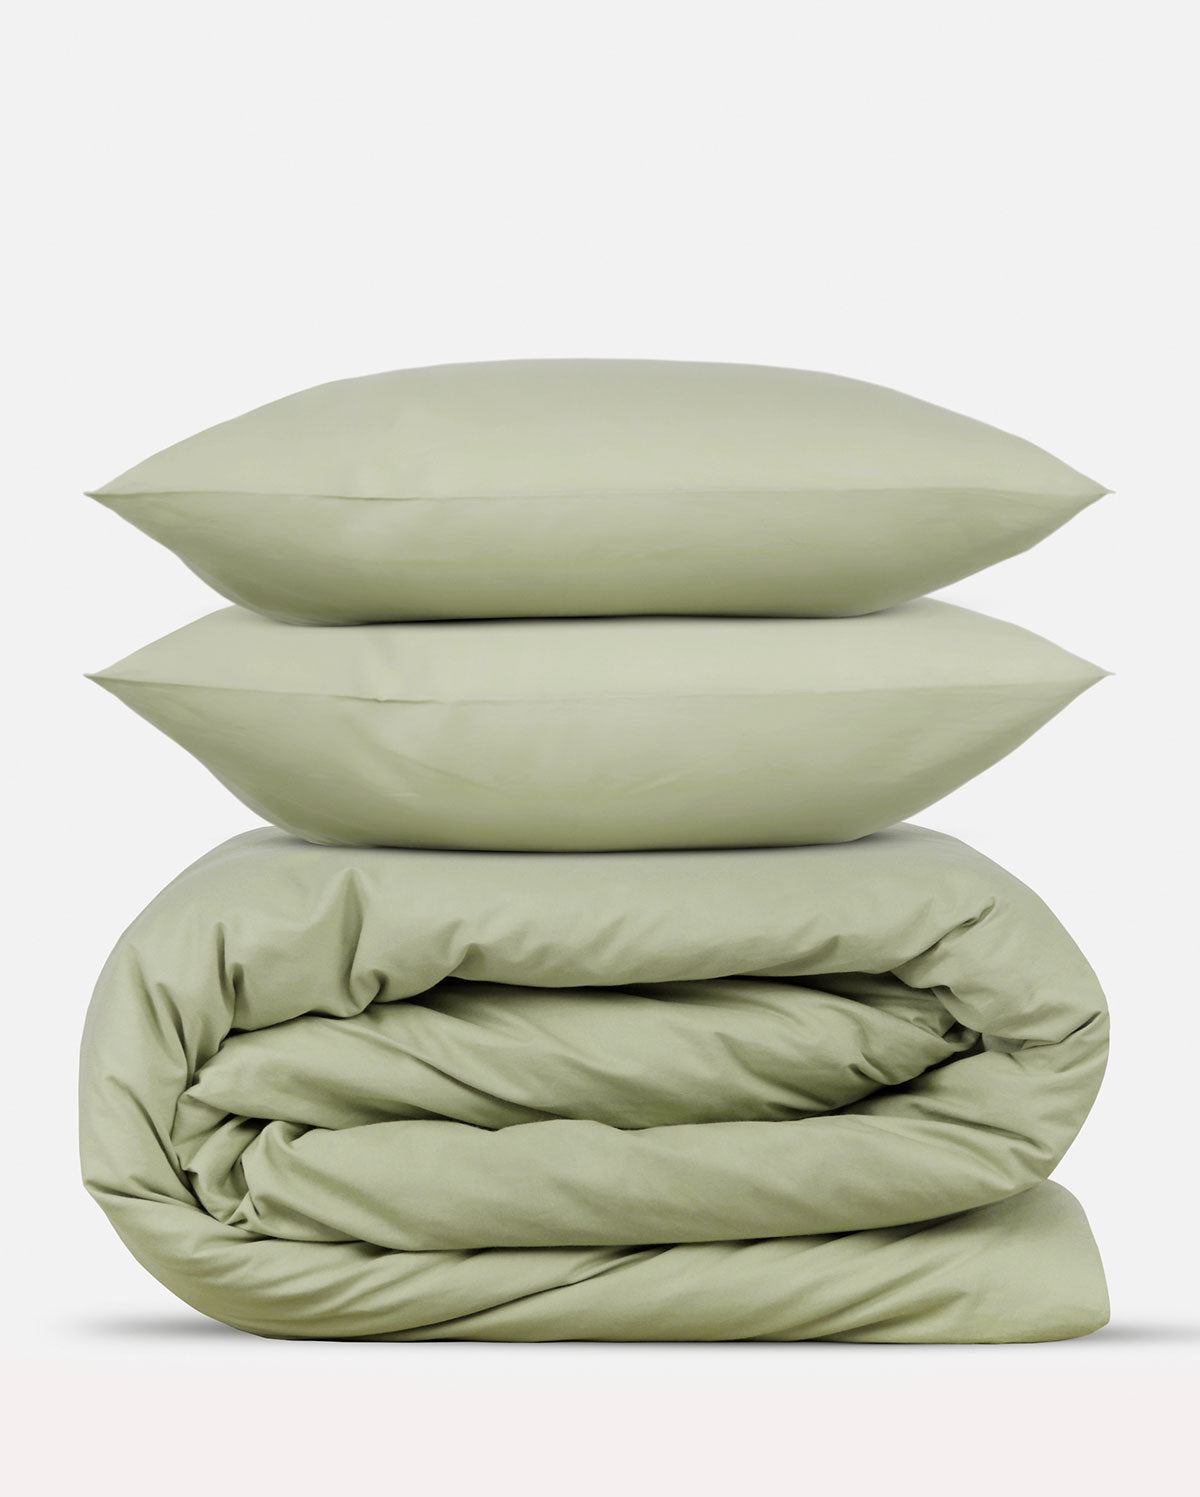 Classic Percale - Duvet Cover Set - Sage Green